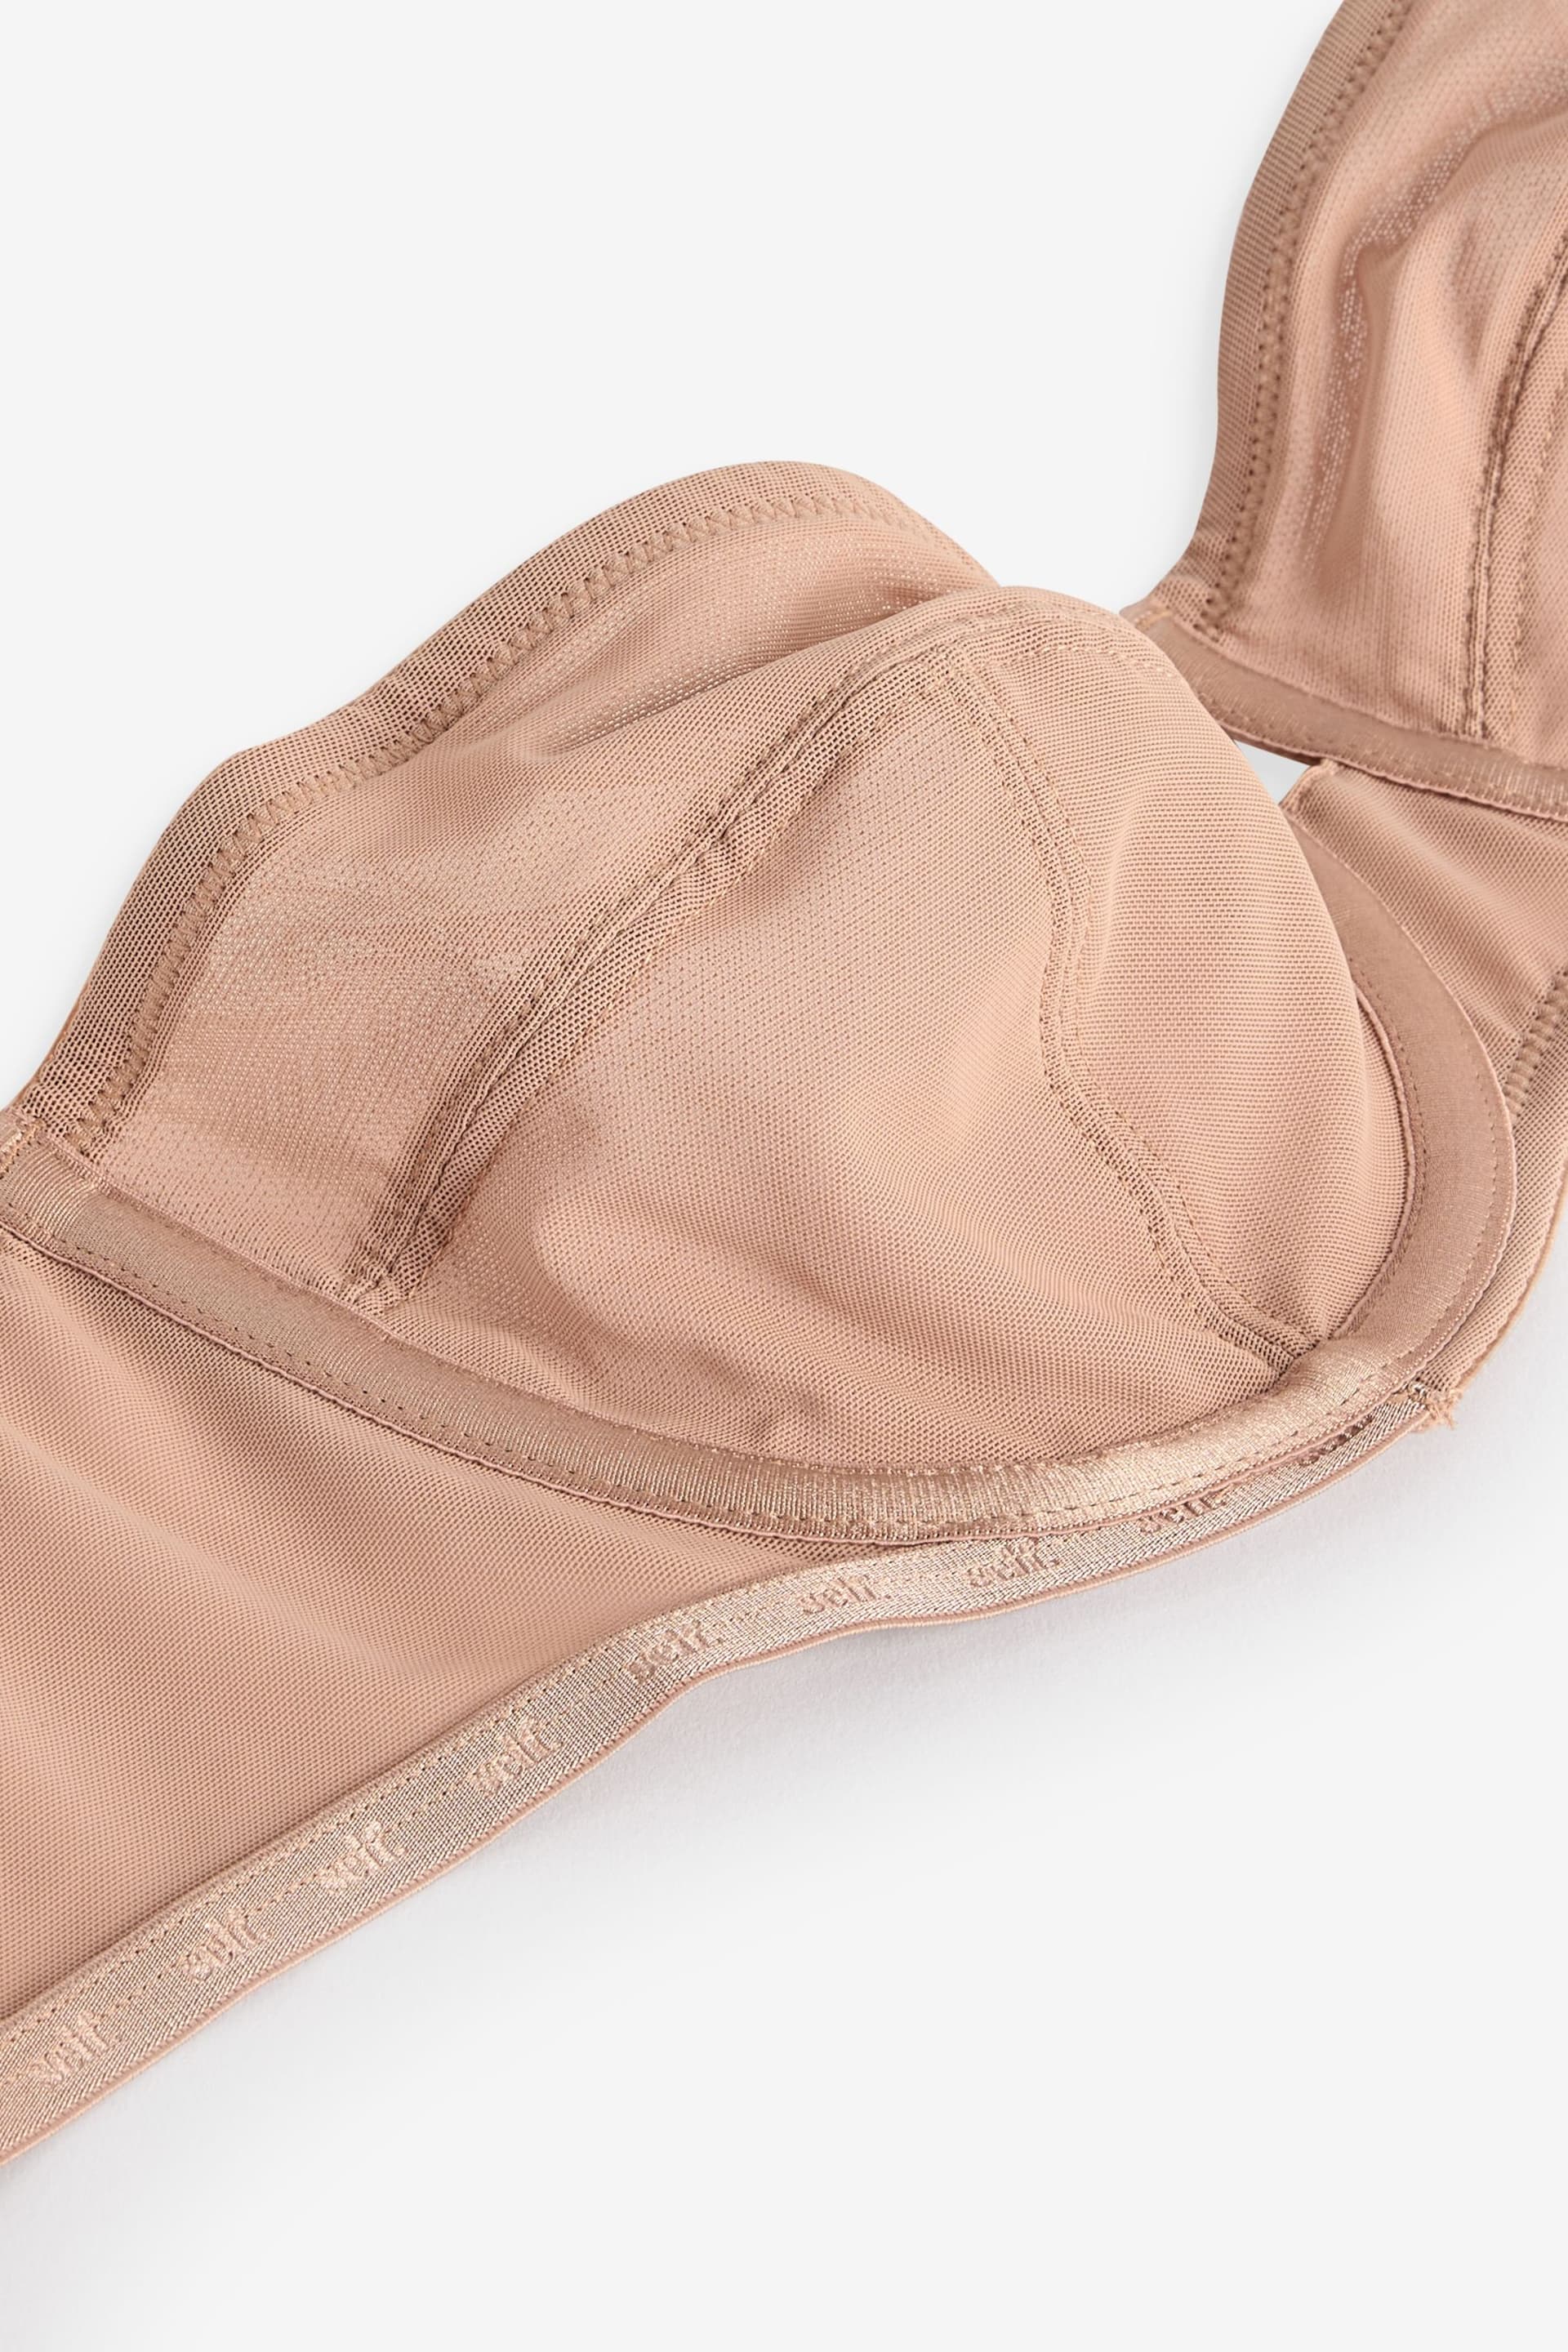 self. Almond Non Pad Wired Strapless Mesh Bra - Image 8 of 8